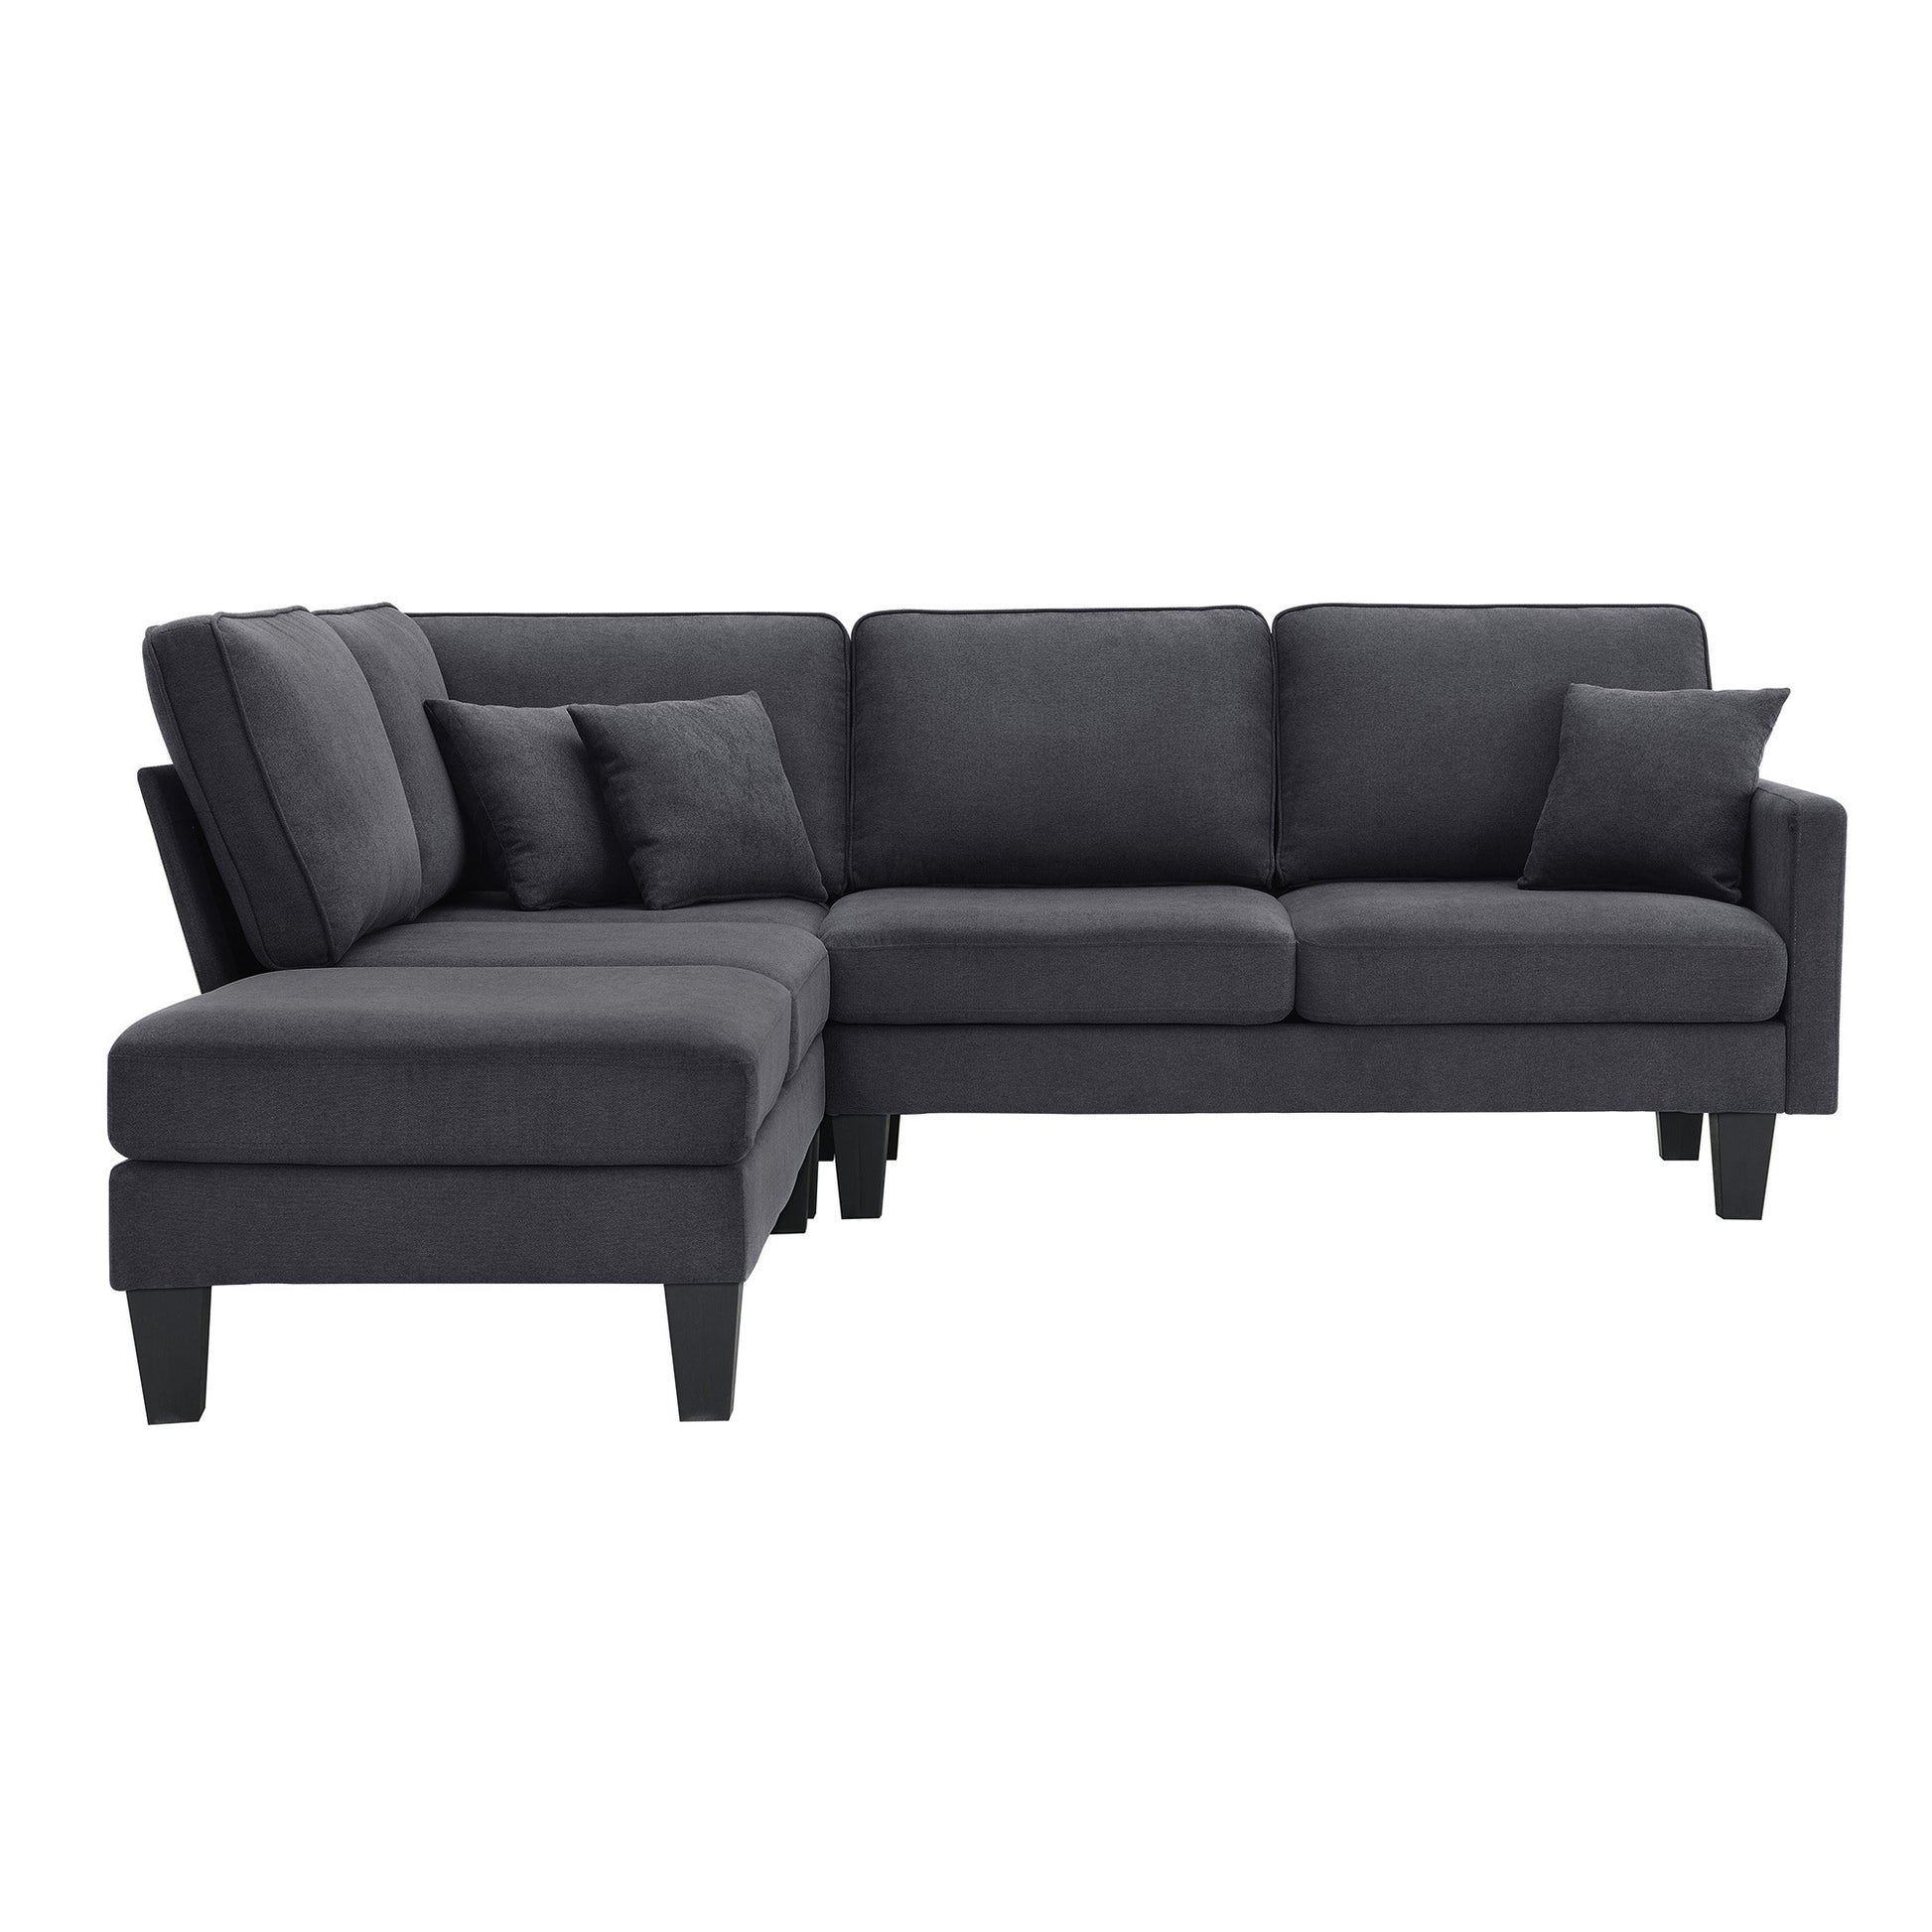 Terrycloth Sectional Sofa, 5-Seat Set, Chaise Lounge, L-Shape, Living Room, Grey